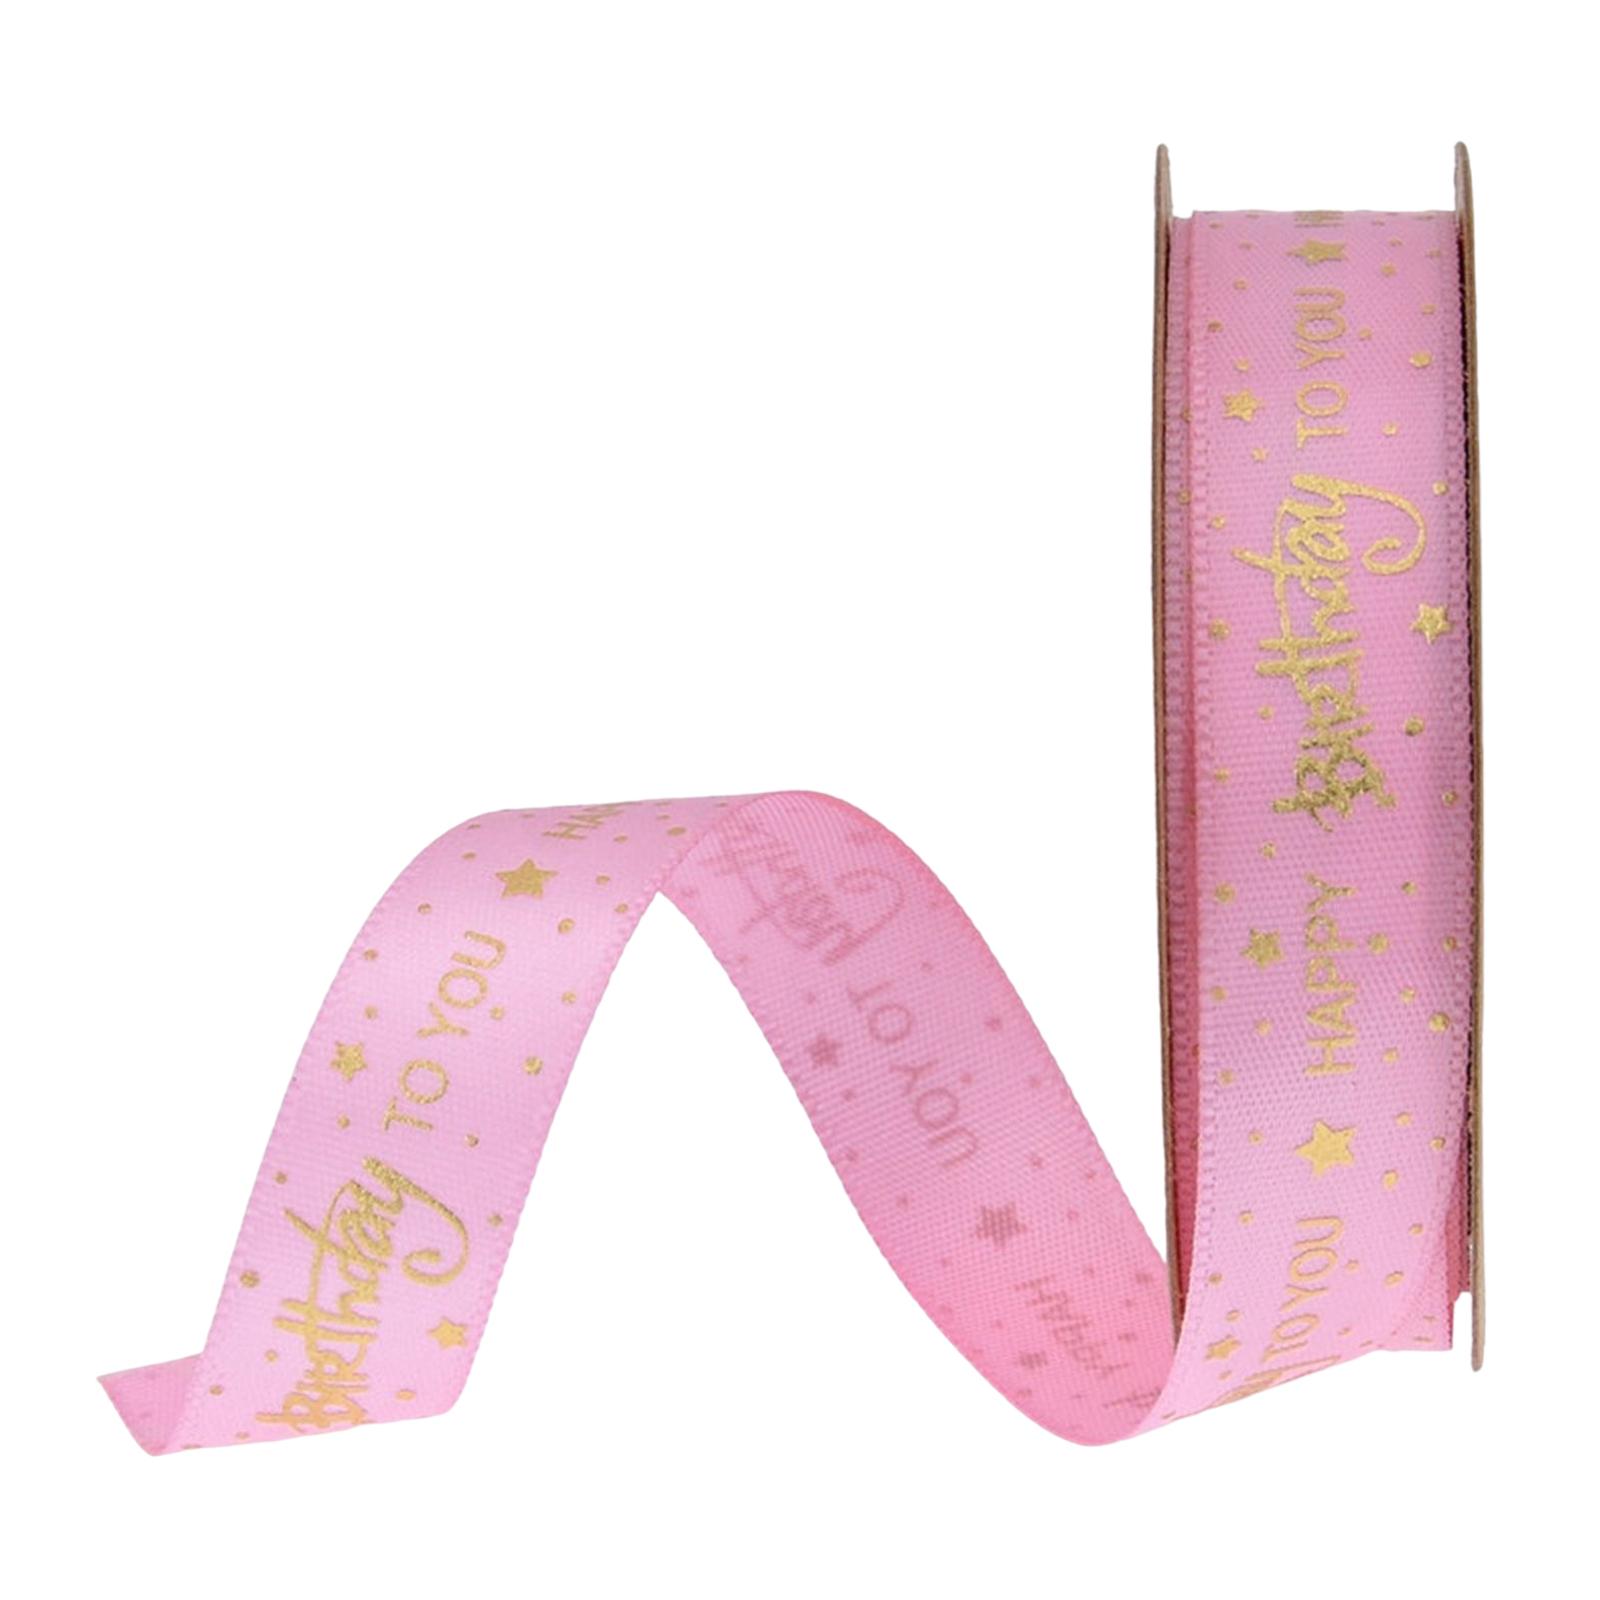 0.59 Happy Birthday Ribbons Gift Wrapping Ribbon DIY Trimming Polyester  Satin for Birthday Craft Bouquet Scrapbooking , 